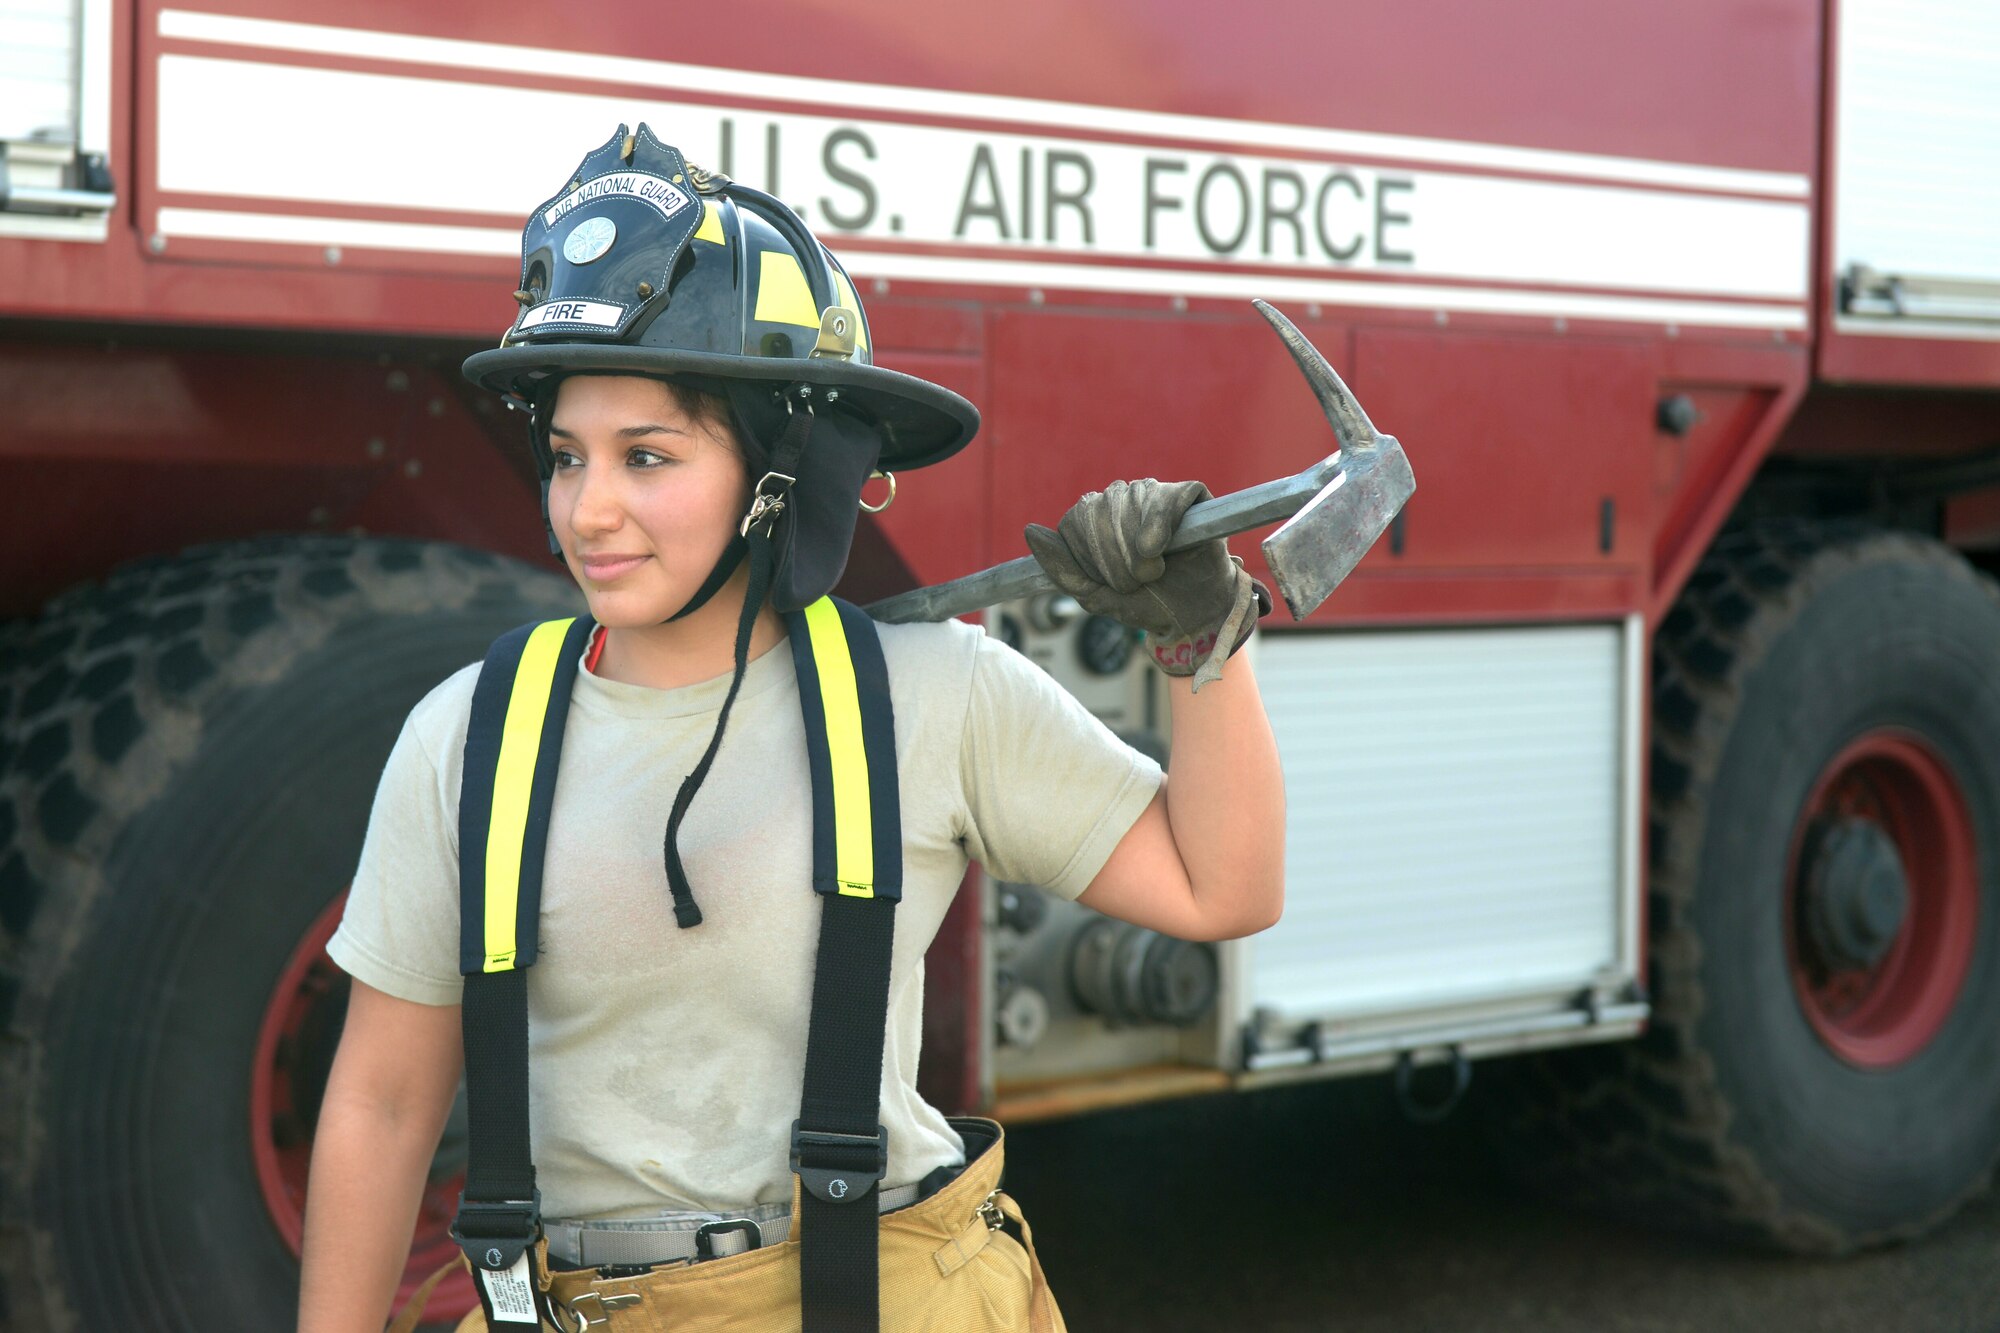 U.S Air Force Staff. Sgt. Alejandra Cepeda, a fire fighter with the 106th Civil Engineer Squadron of the 106th Rescue Wing assigned to the New York Air National Guard, poses with a halligan bar at the 106th Rescue Wing in Westhampton Beach, New York November 2, 2017.